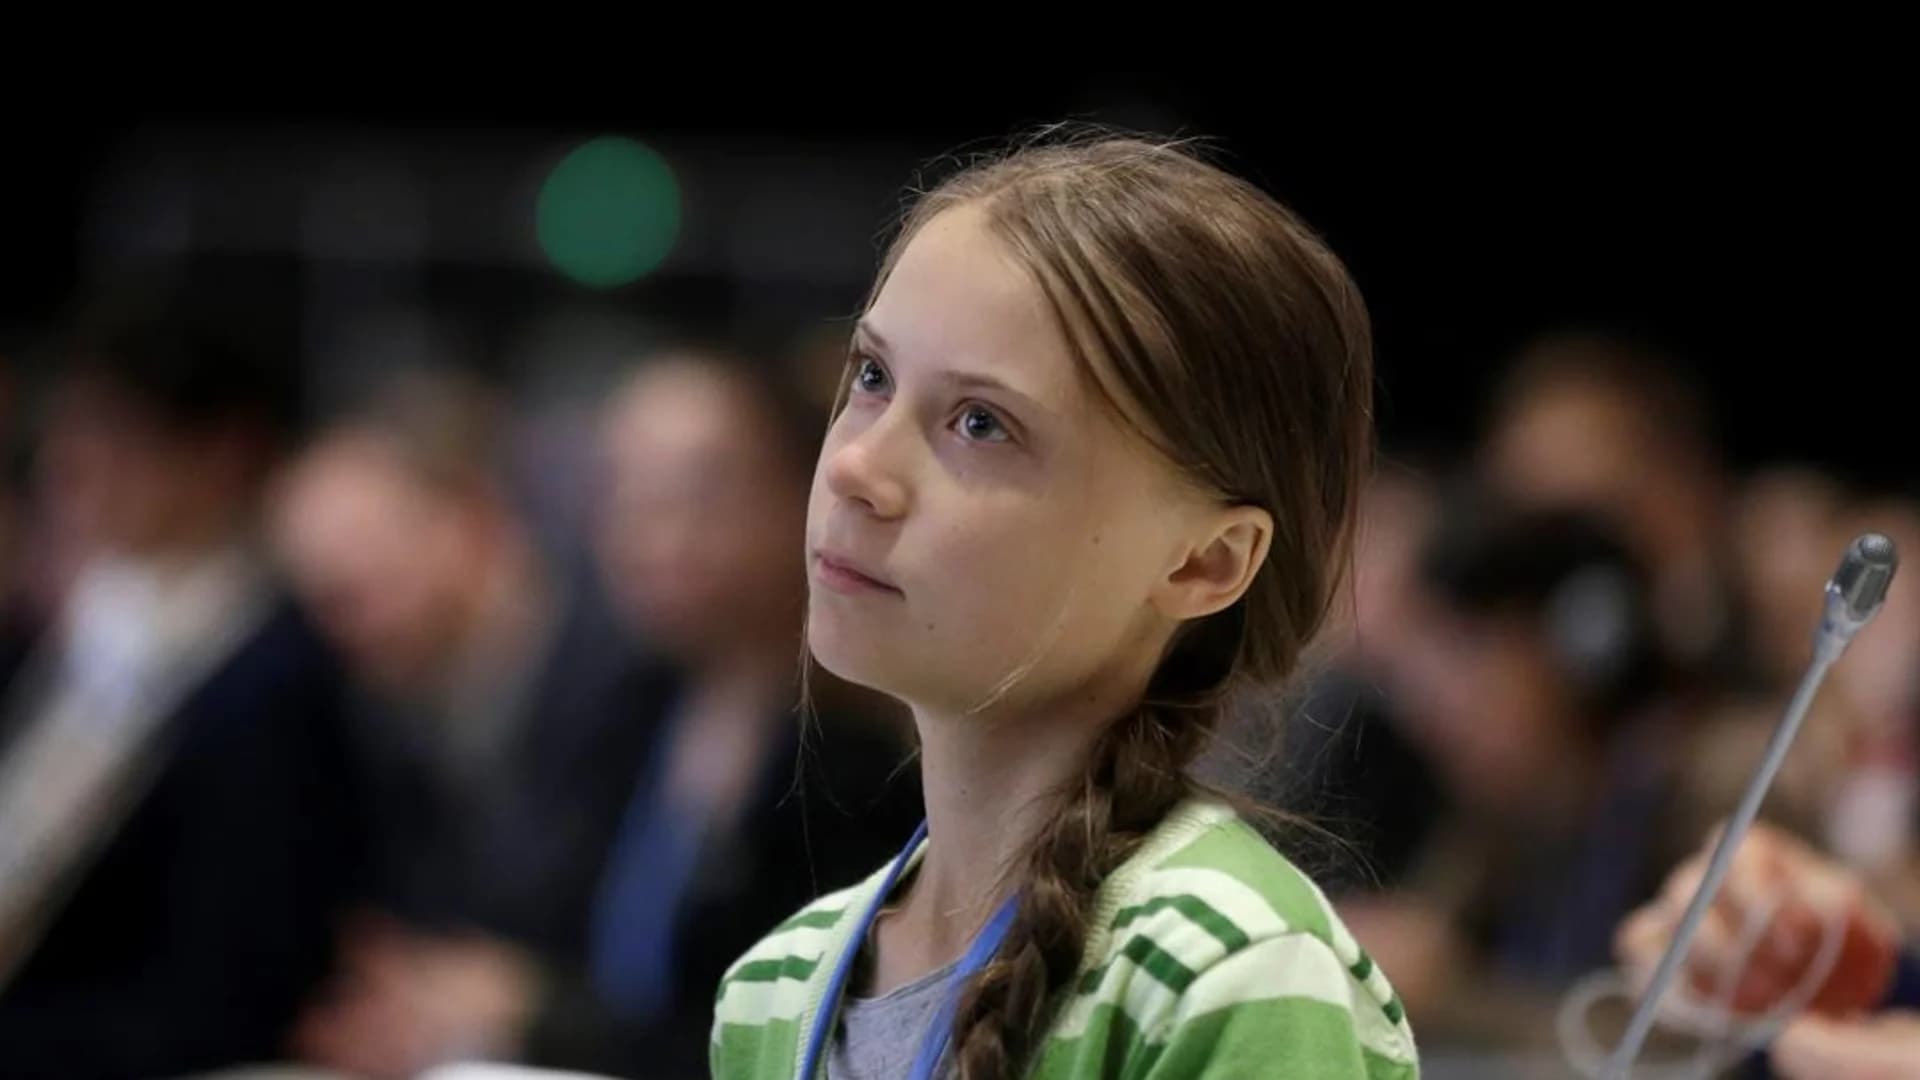 Climate activist Greta Thunberg is Time 'person of the year'